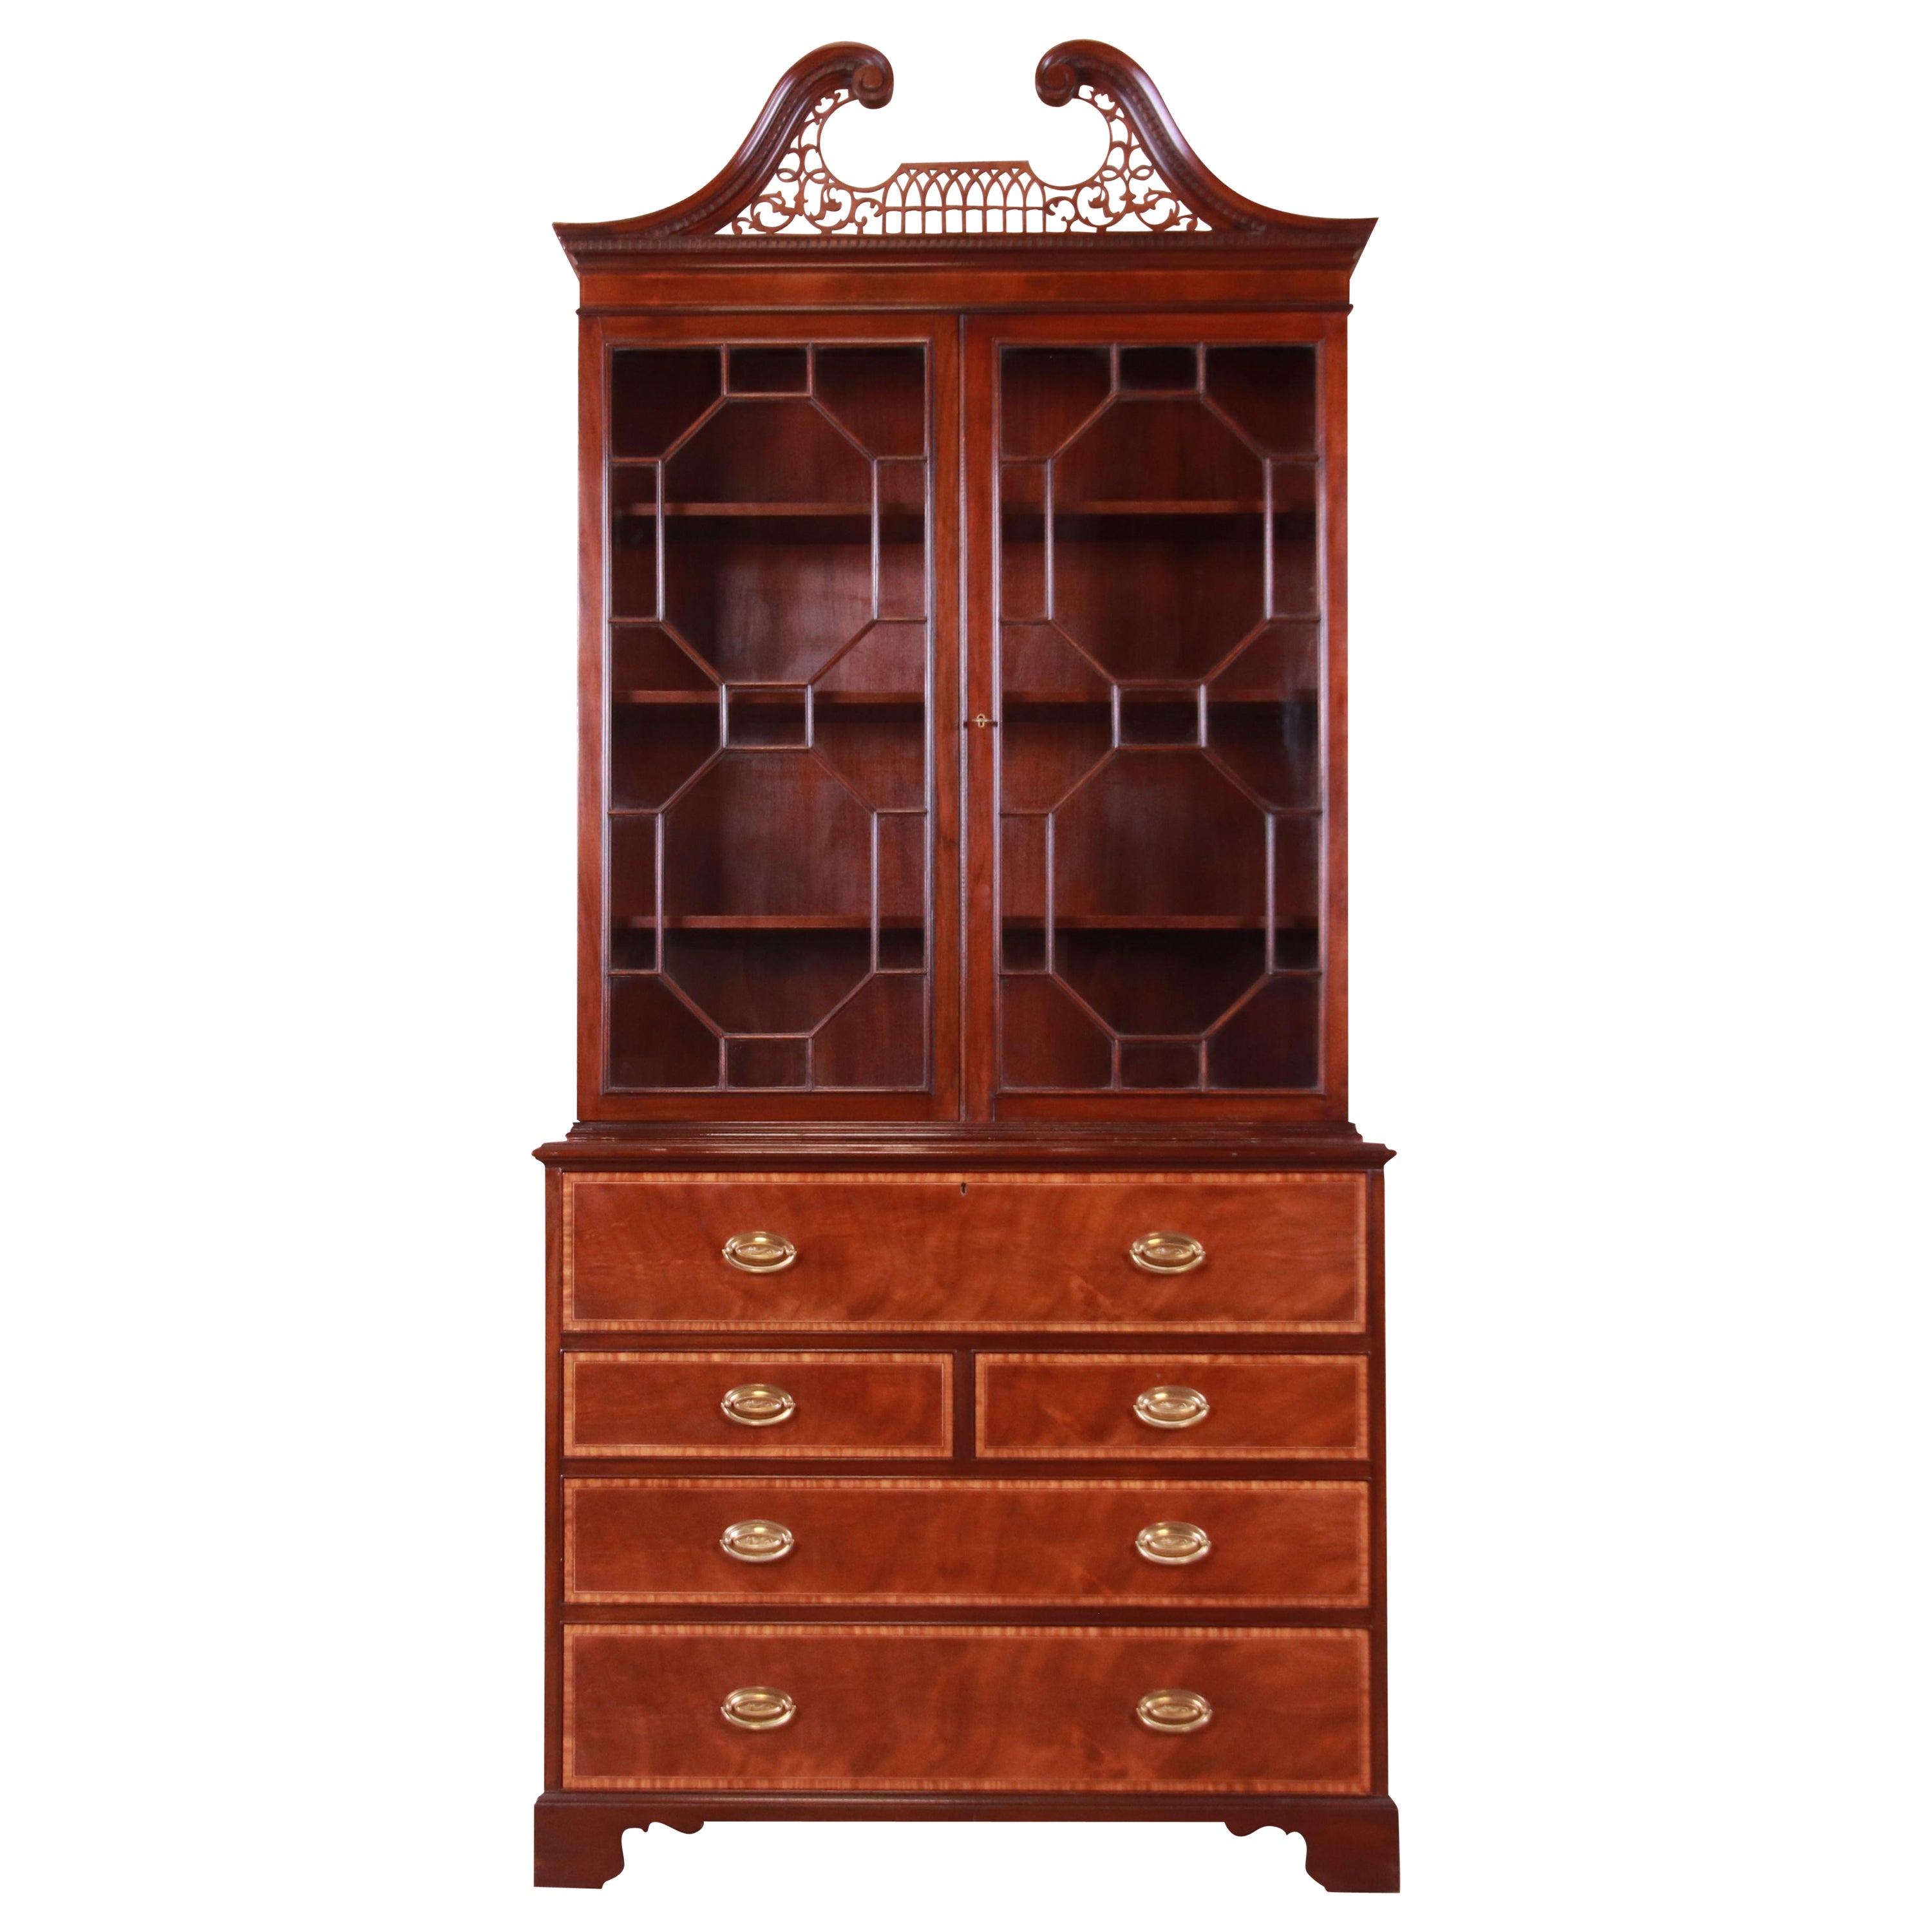 Baker Furniture Chippendale Mahogany Breakfront Bookcase with Secretary Desk